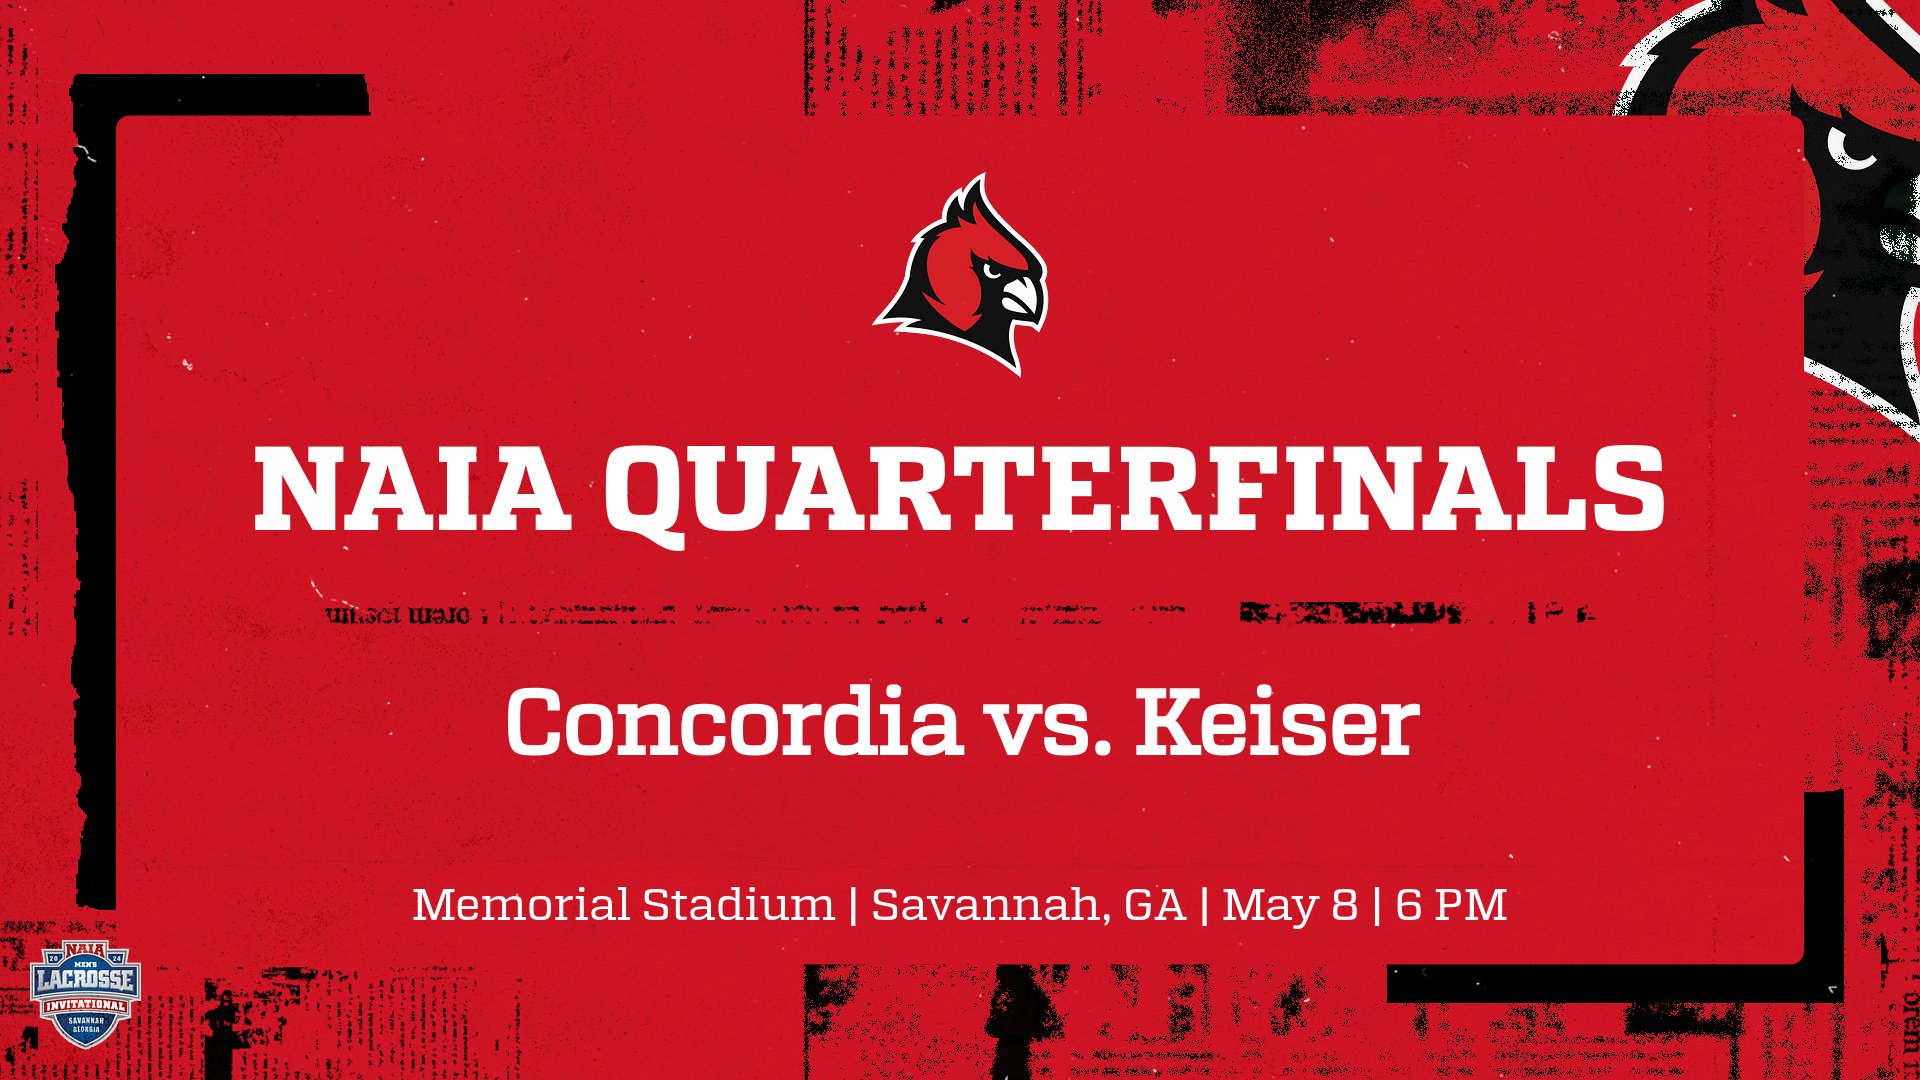 NAIA QUATERFINAL PREVIEW: Men's Lacrosse prepares for rematch against #2 Keiser in opening round